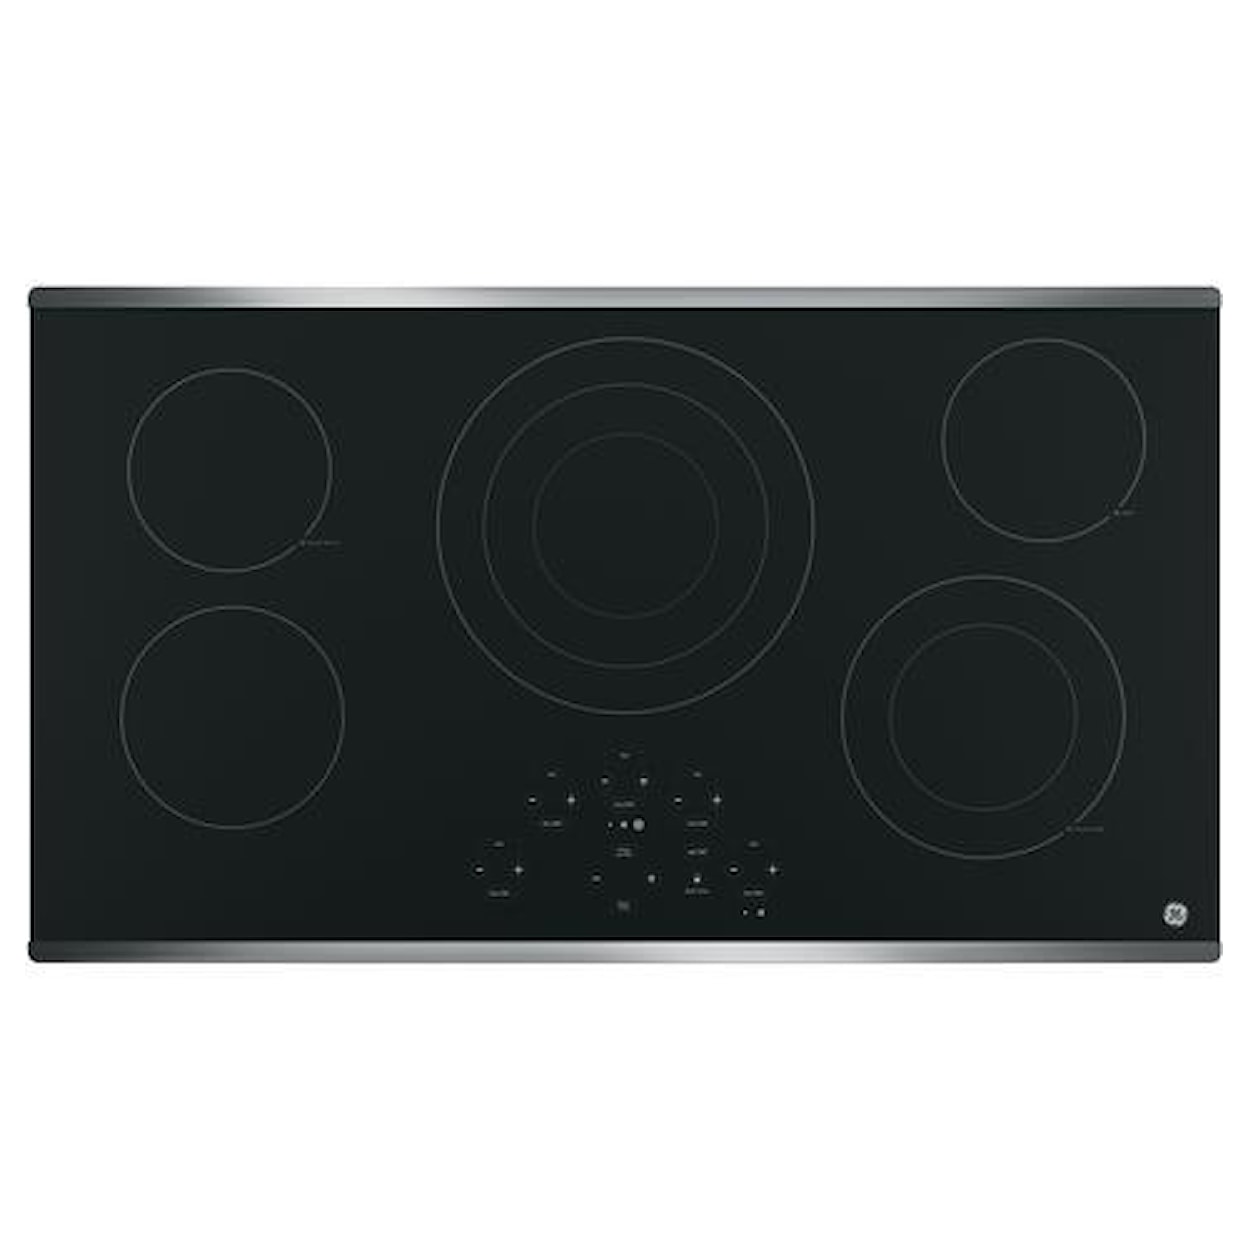 GE Appliances GE Electric Cooktops 36" Touch Control Electric Cooktop